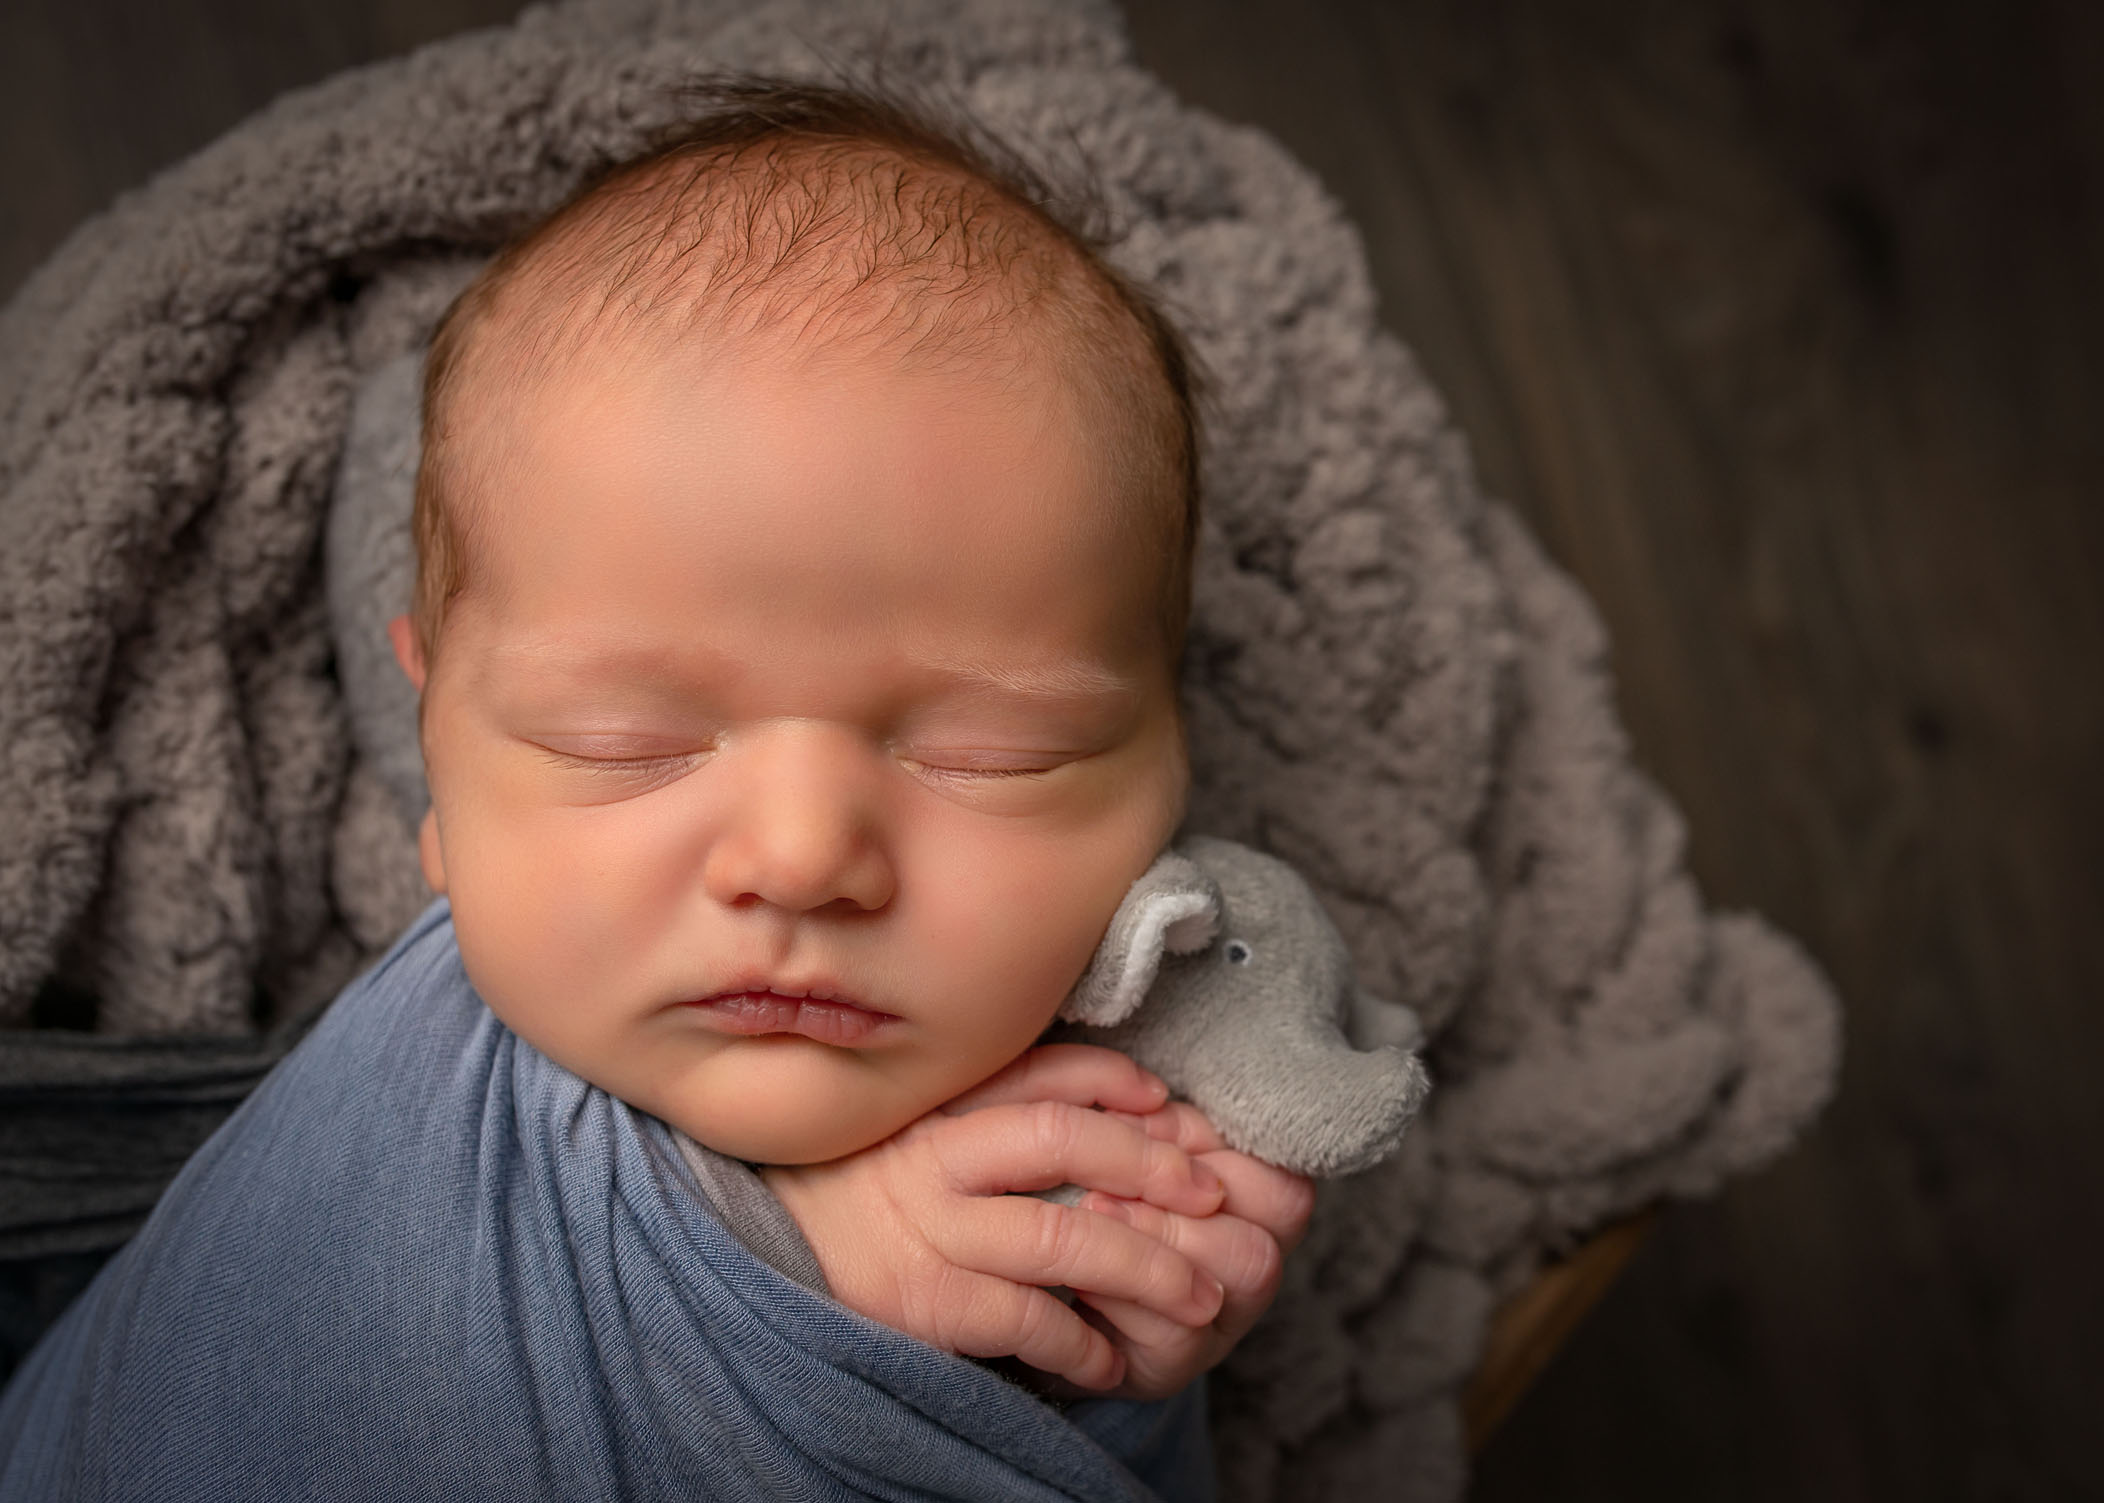 Close up of newborn baby sleeping with tiny stuffed elephant held in his hands